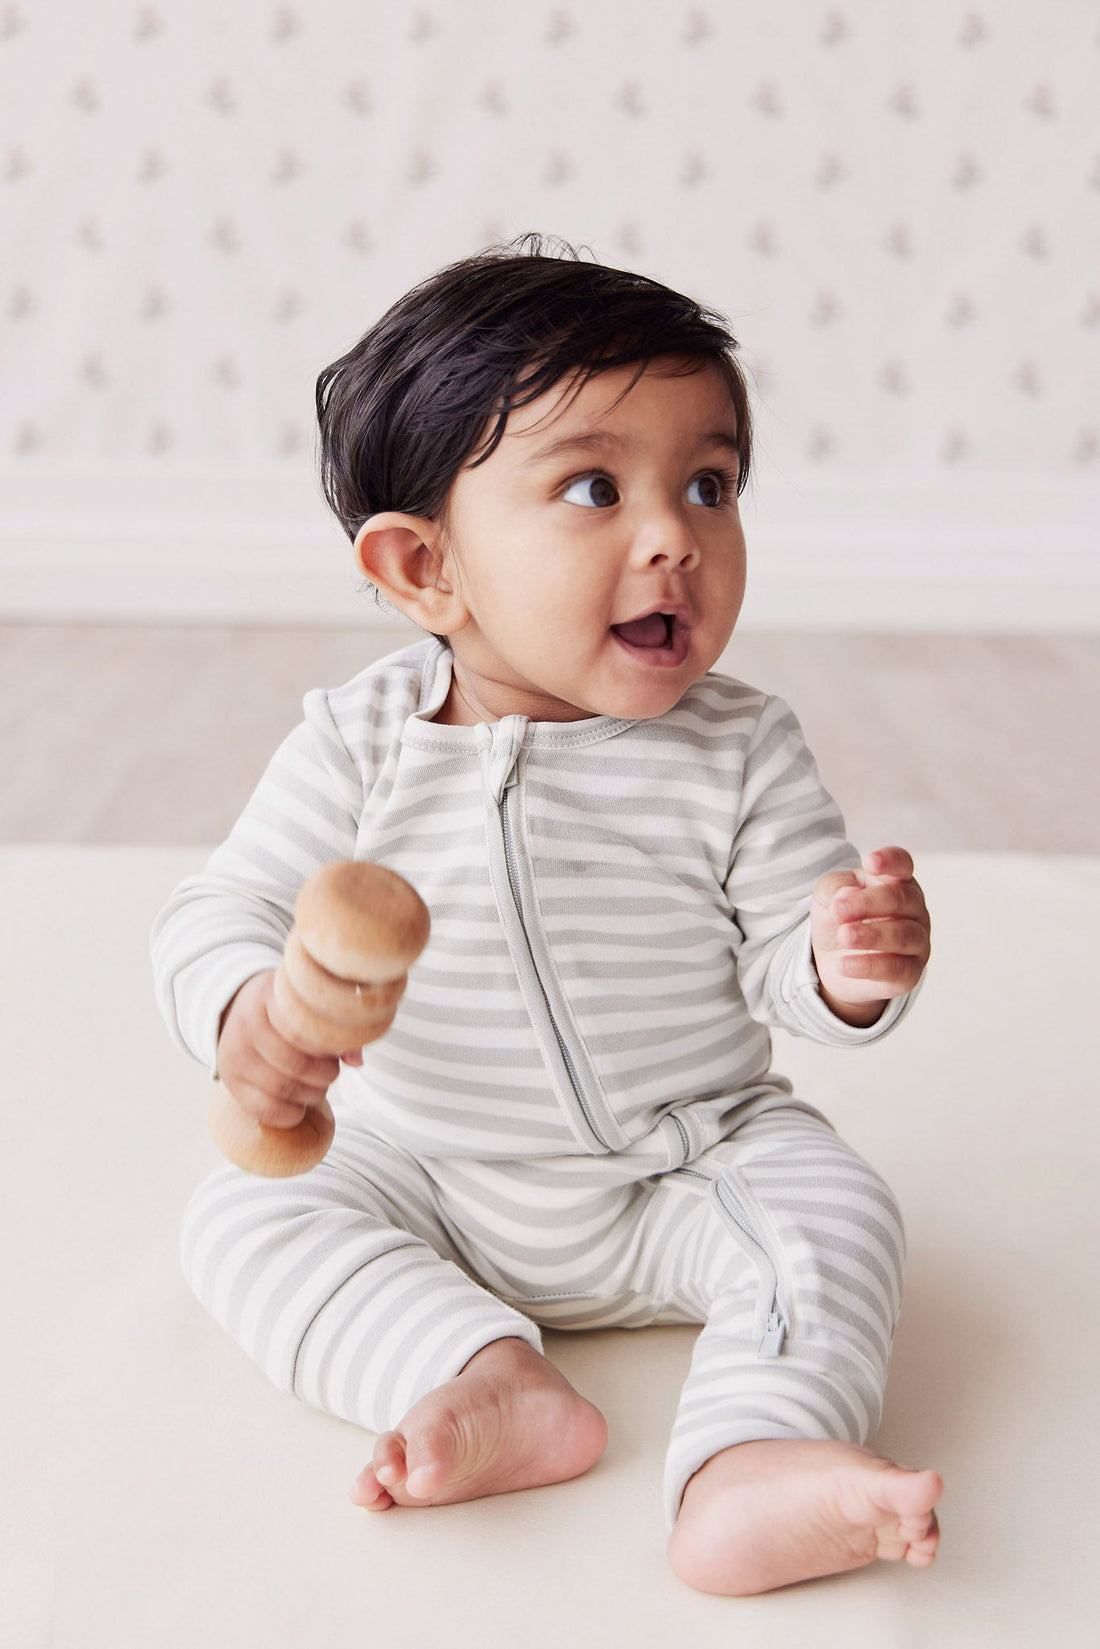 Pima Cotton Reese Zip Onepiece - Mineral/Cloud Stripe Childrens Onepiece from Jamie Kay USA